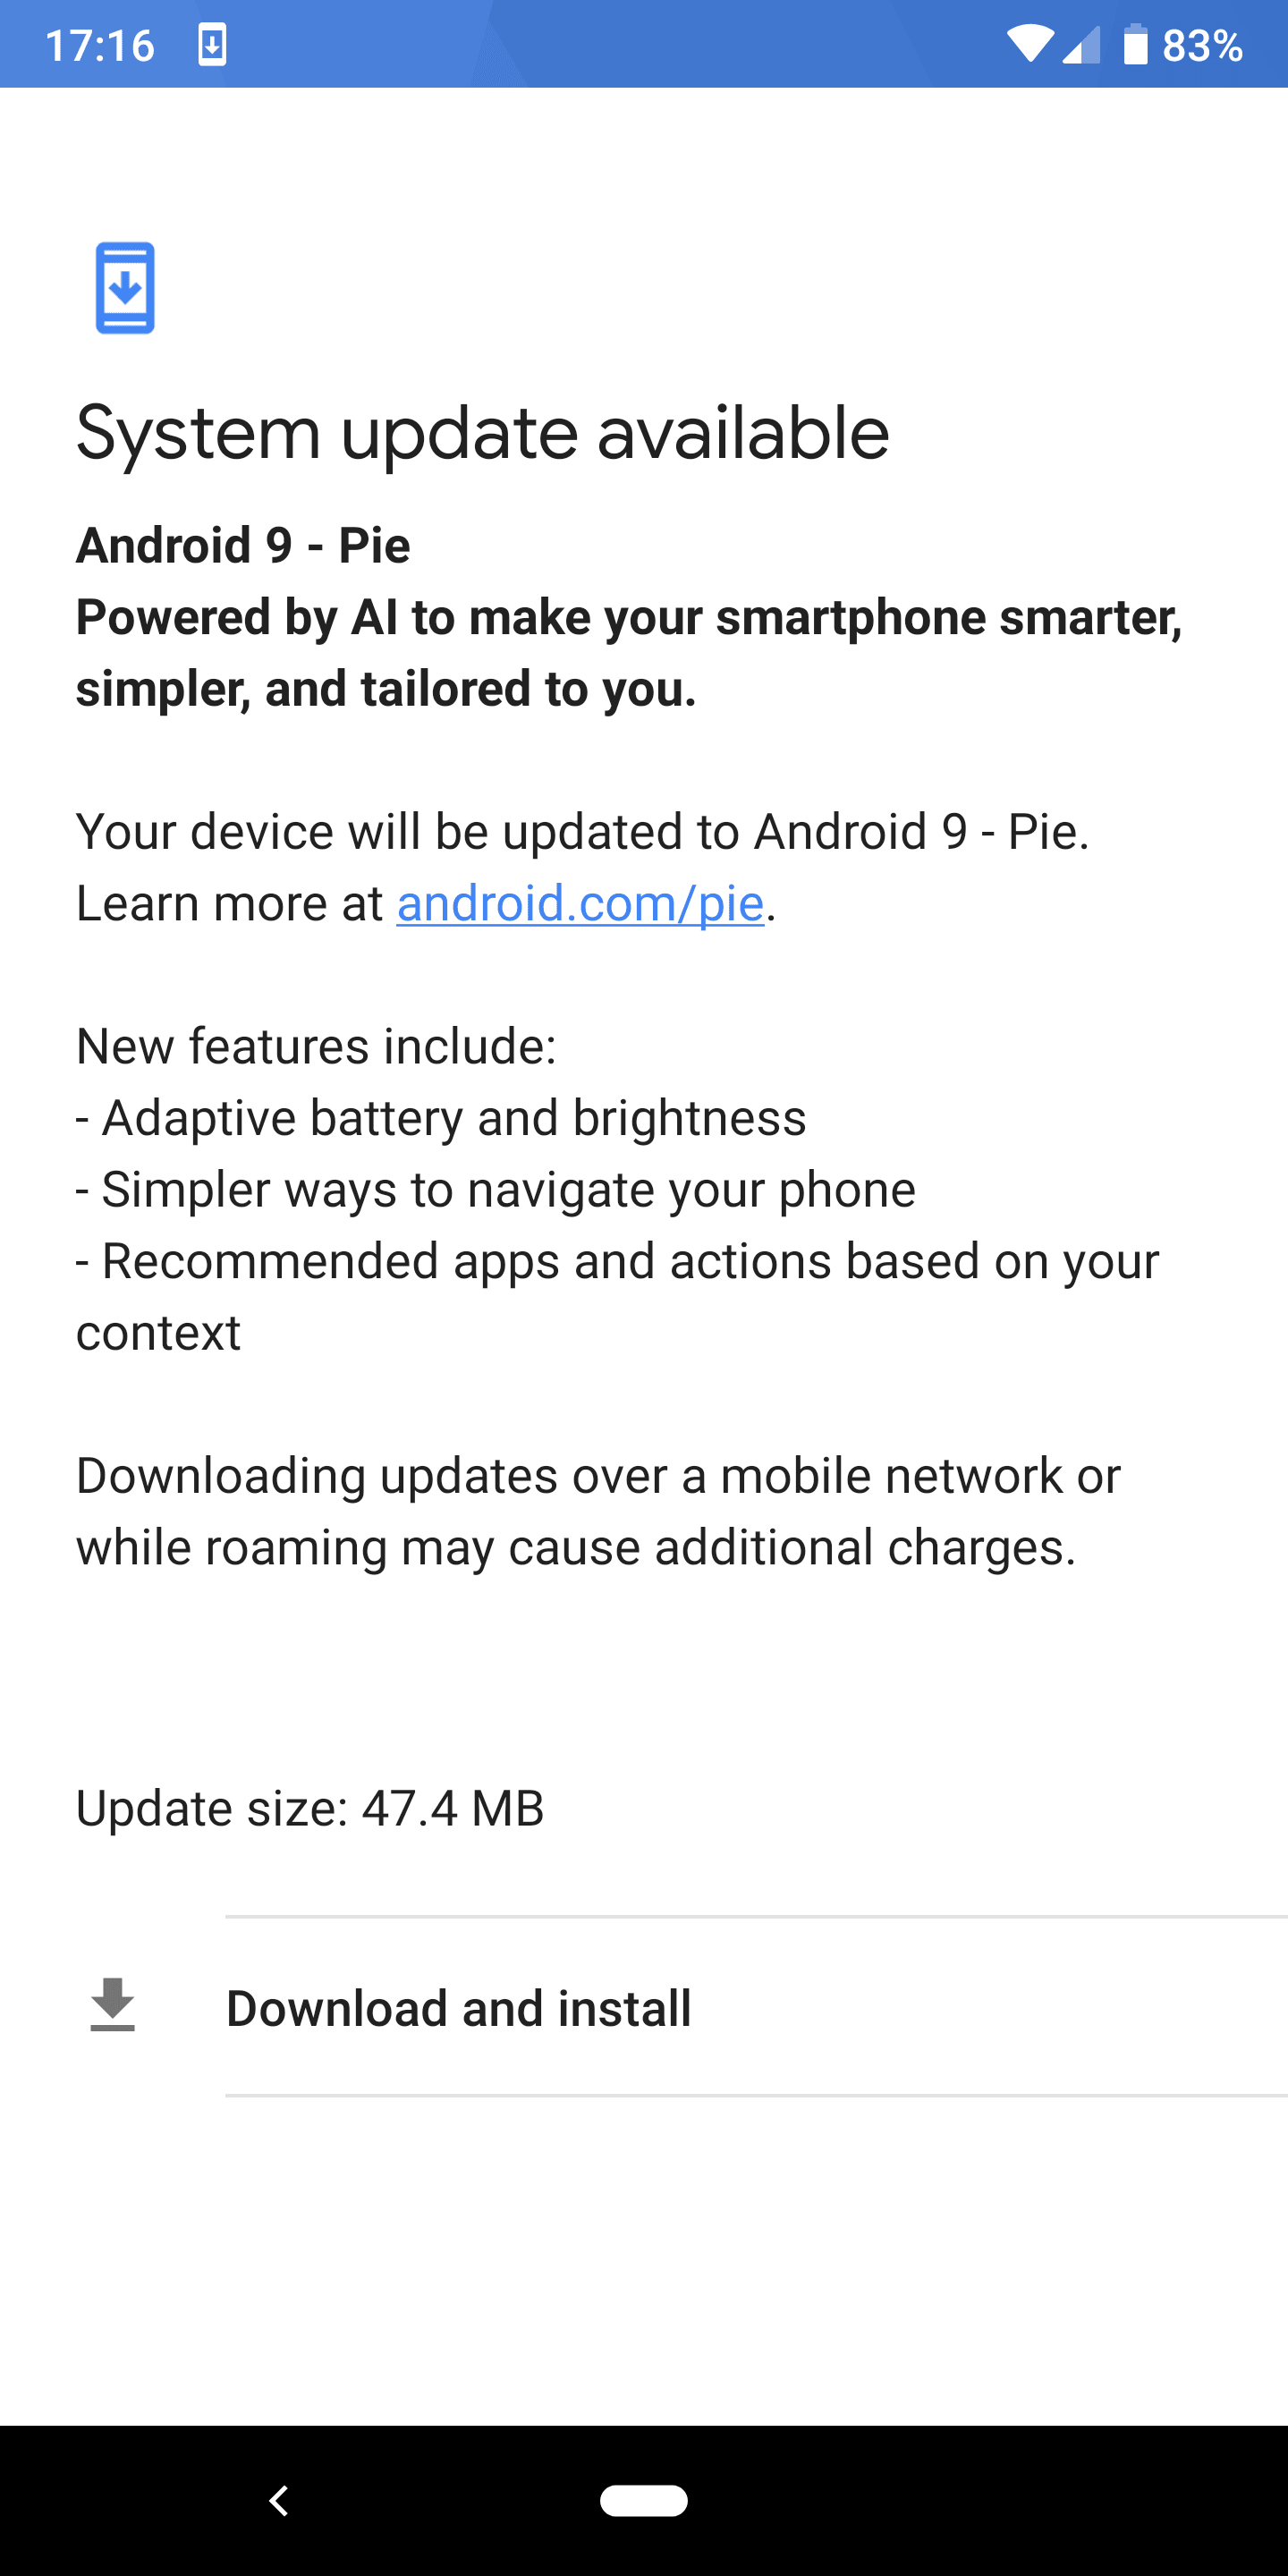 Android 9 “Pie” Officially Announced